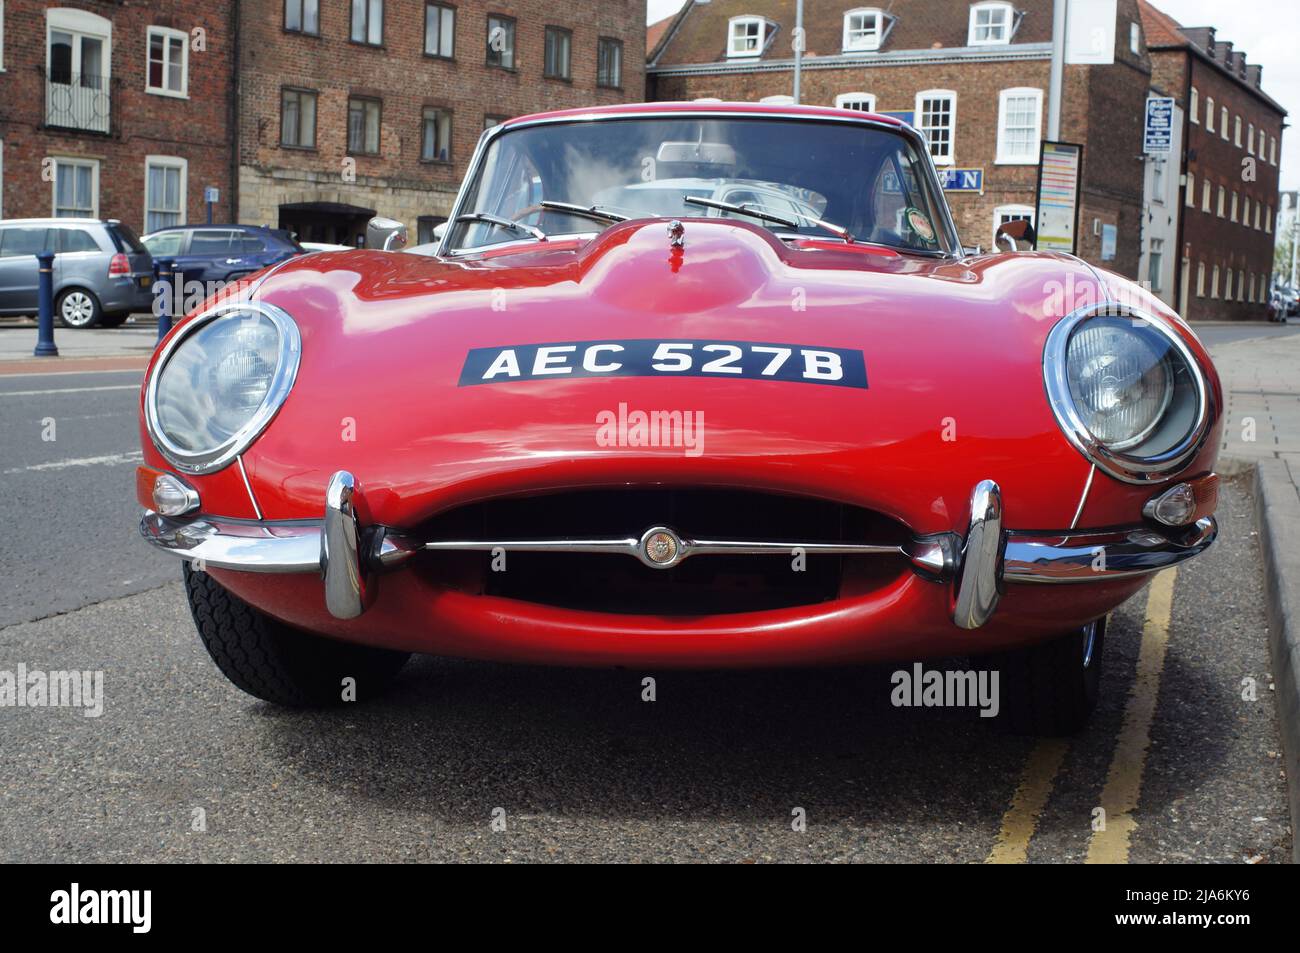 Front view of a red E-Type Jaguar sports car parked on the street Stock Photo